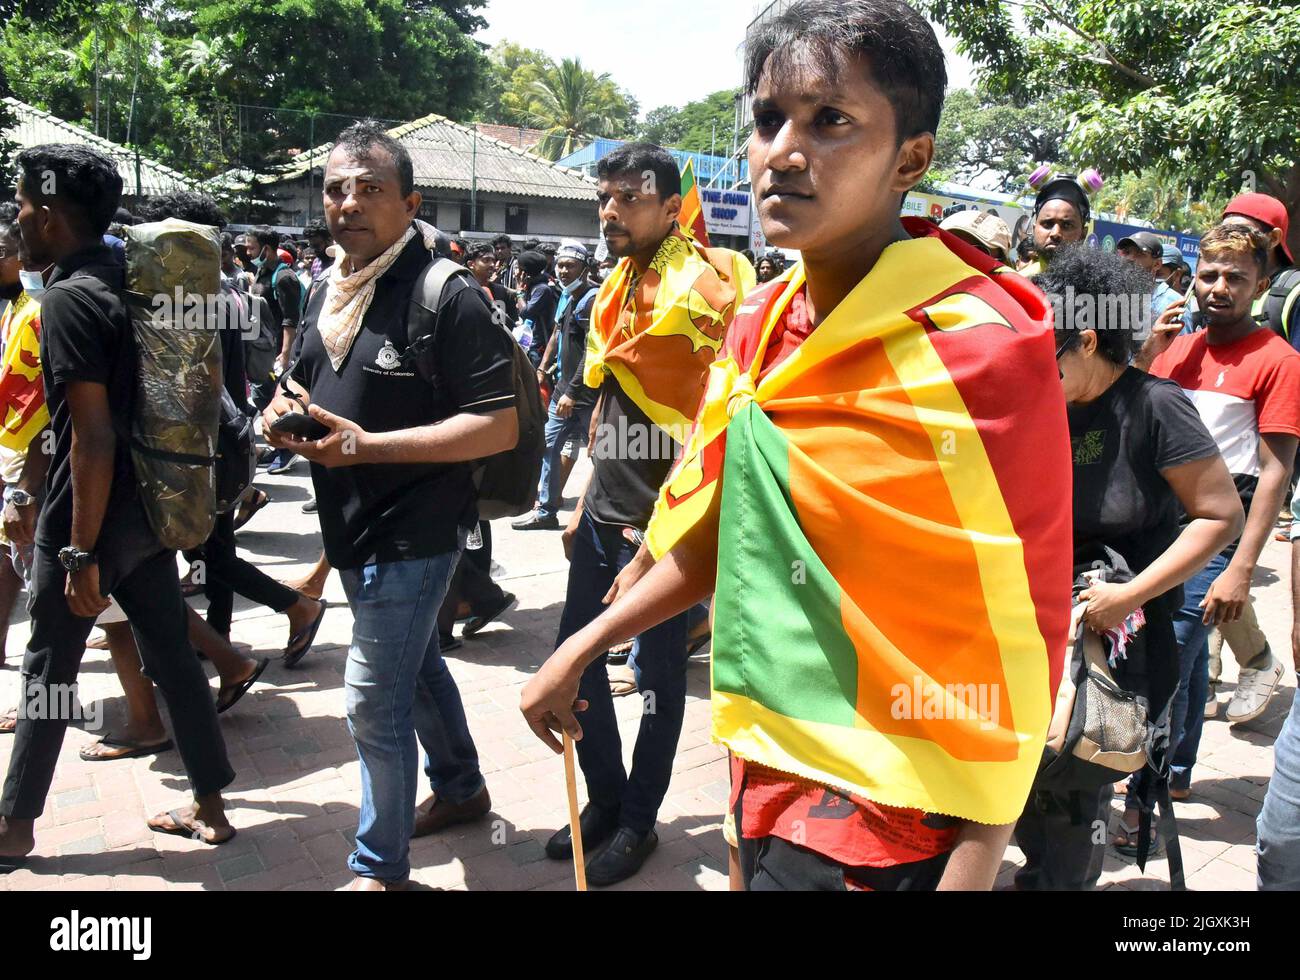 Colombo, Sri Lanka. 13th July, 2022. People demonstrate in front of the Prime Minister's Office calling for the resignation of Prime Minister Ranil Wickremesinghe who now functions as the acting president . Some of them forcibly entered the office in Colombo-Sri Lanka, on Wednsday on July 13, 2022. Thousands of anti-government protesters stormed into Sri Lanka Prime Minister Ranil Wickremesinghe's office, hours after he was named as acting president. Photo by Kumara De Mel/ Credit: UPI/Alamy Live News Stock Photo